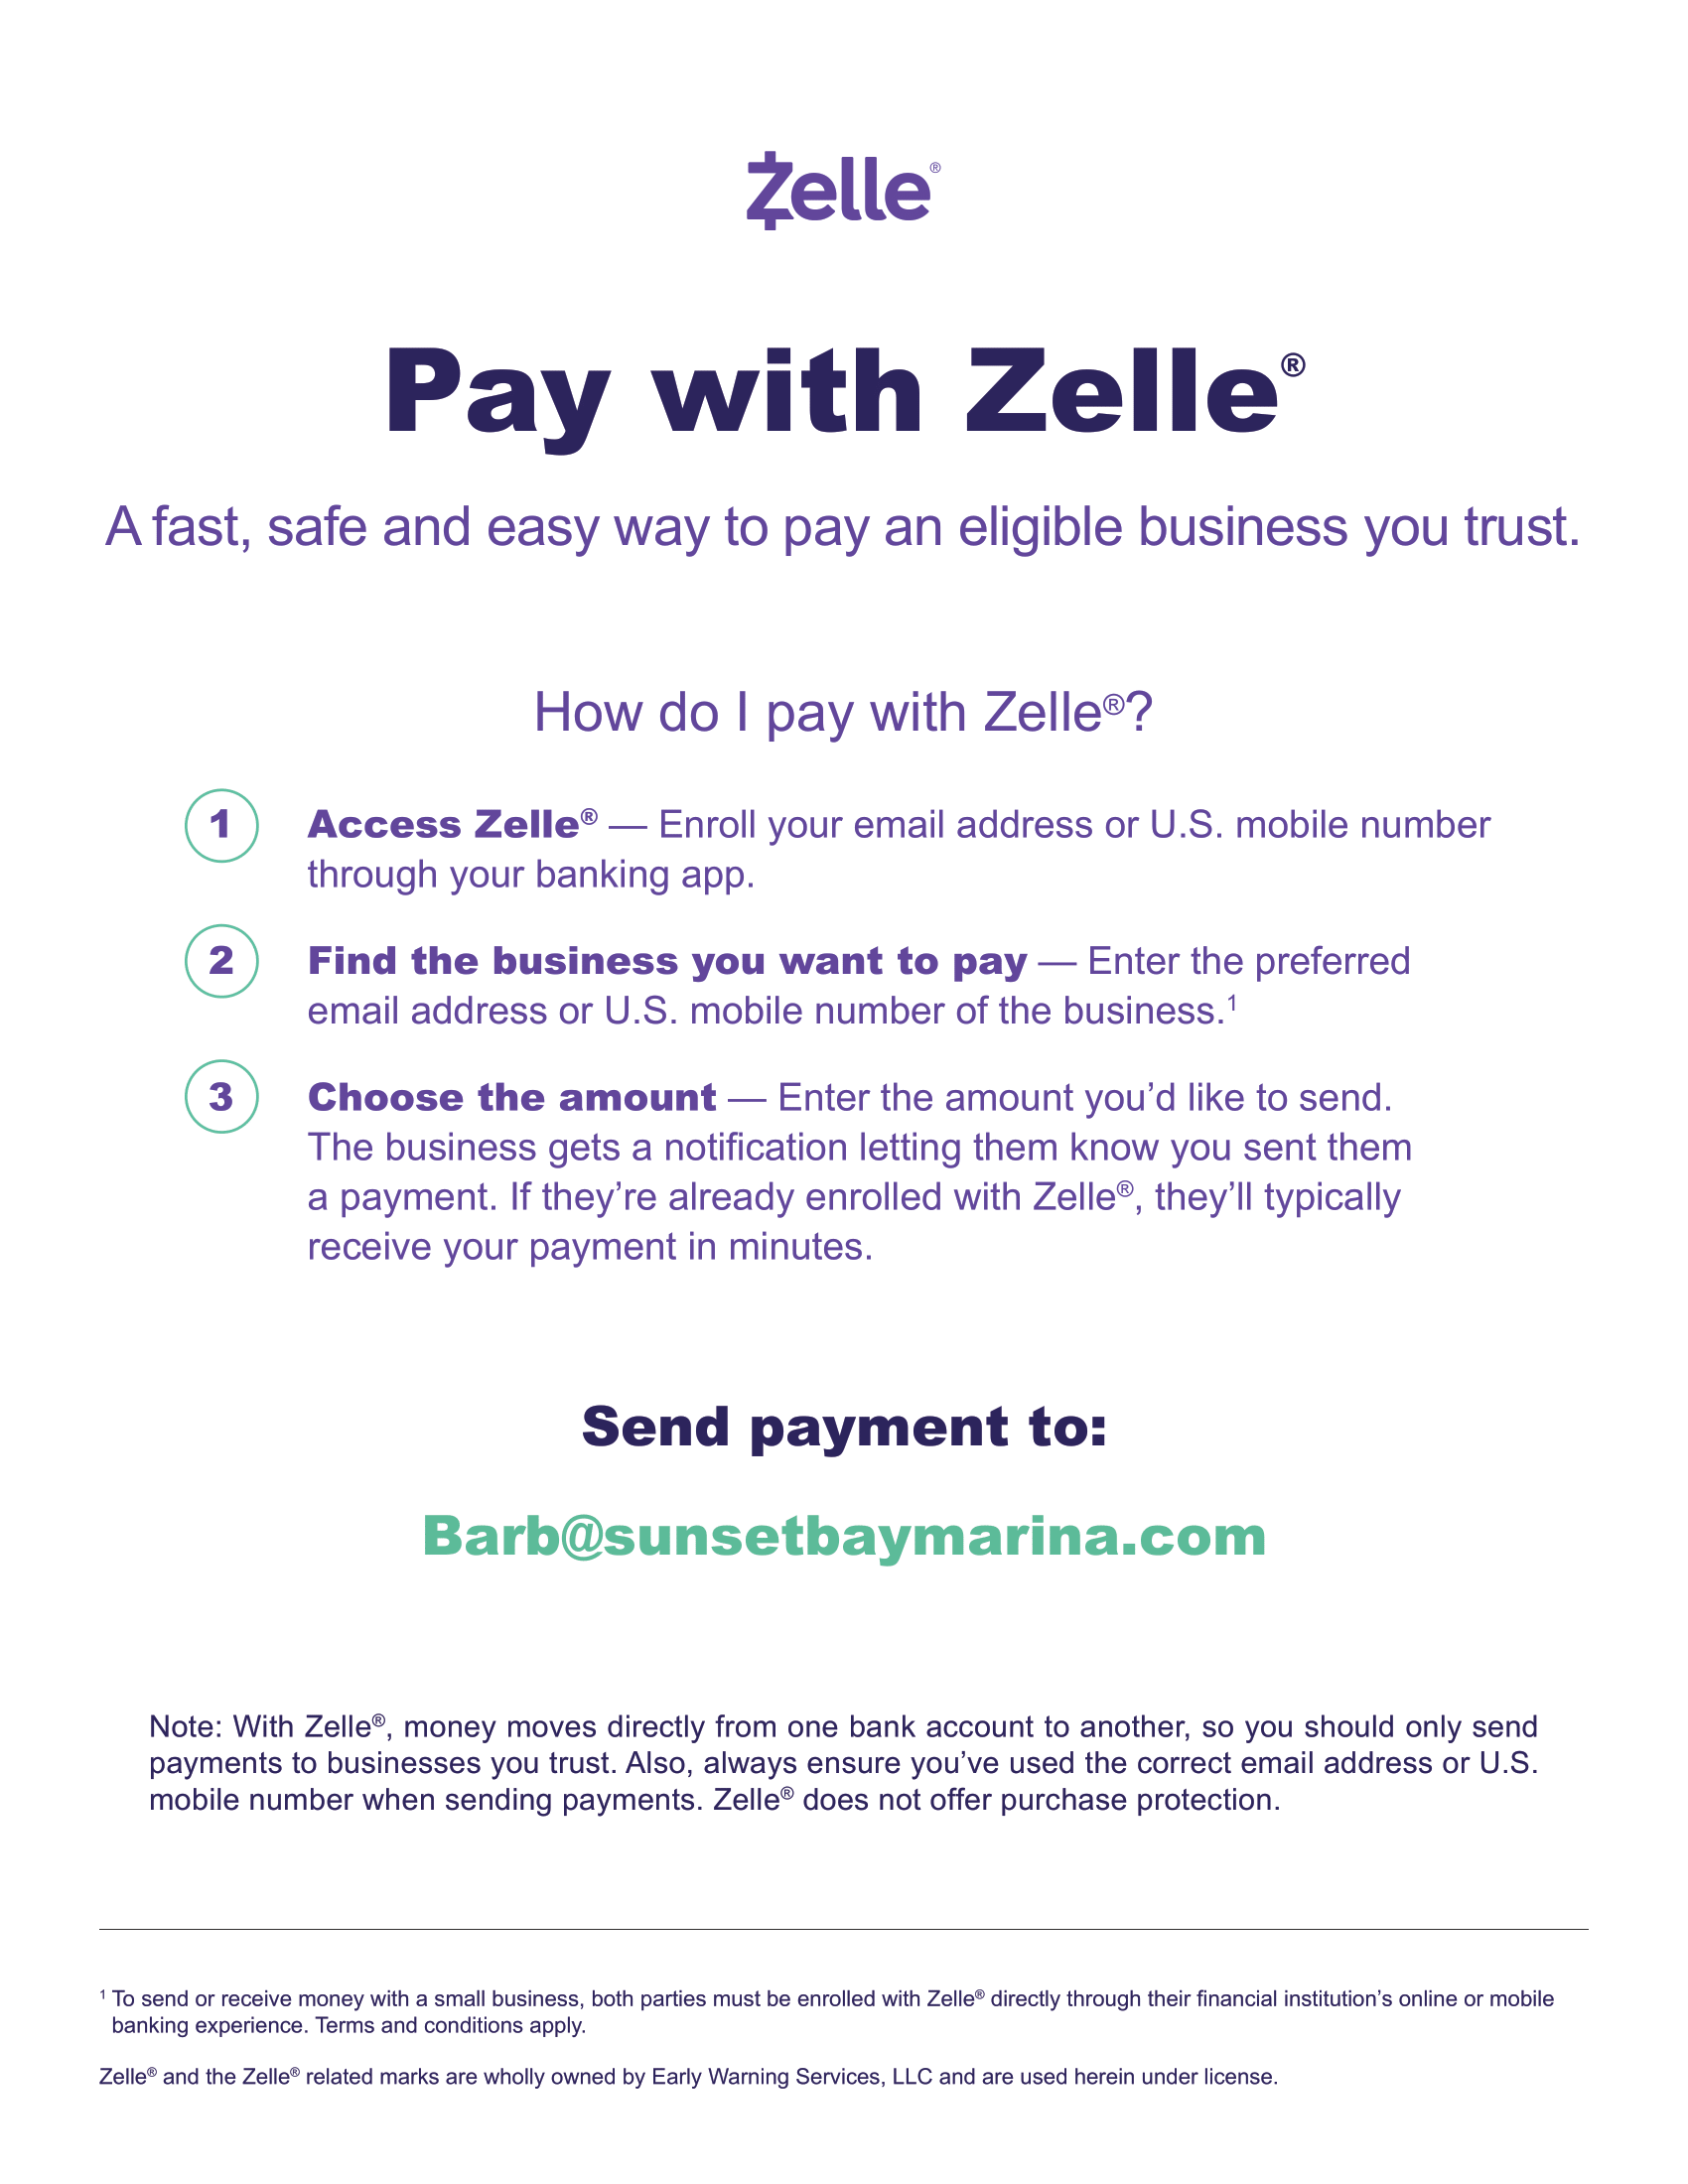 Zelle pay manual